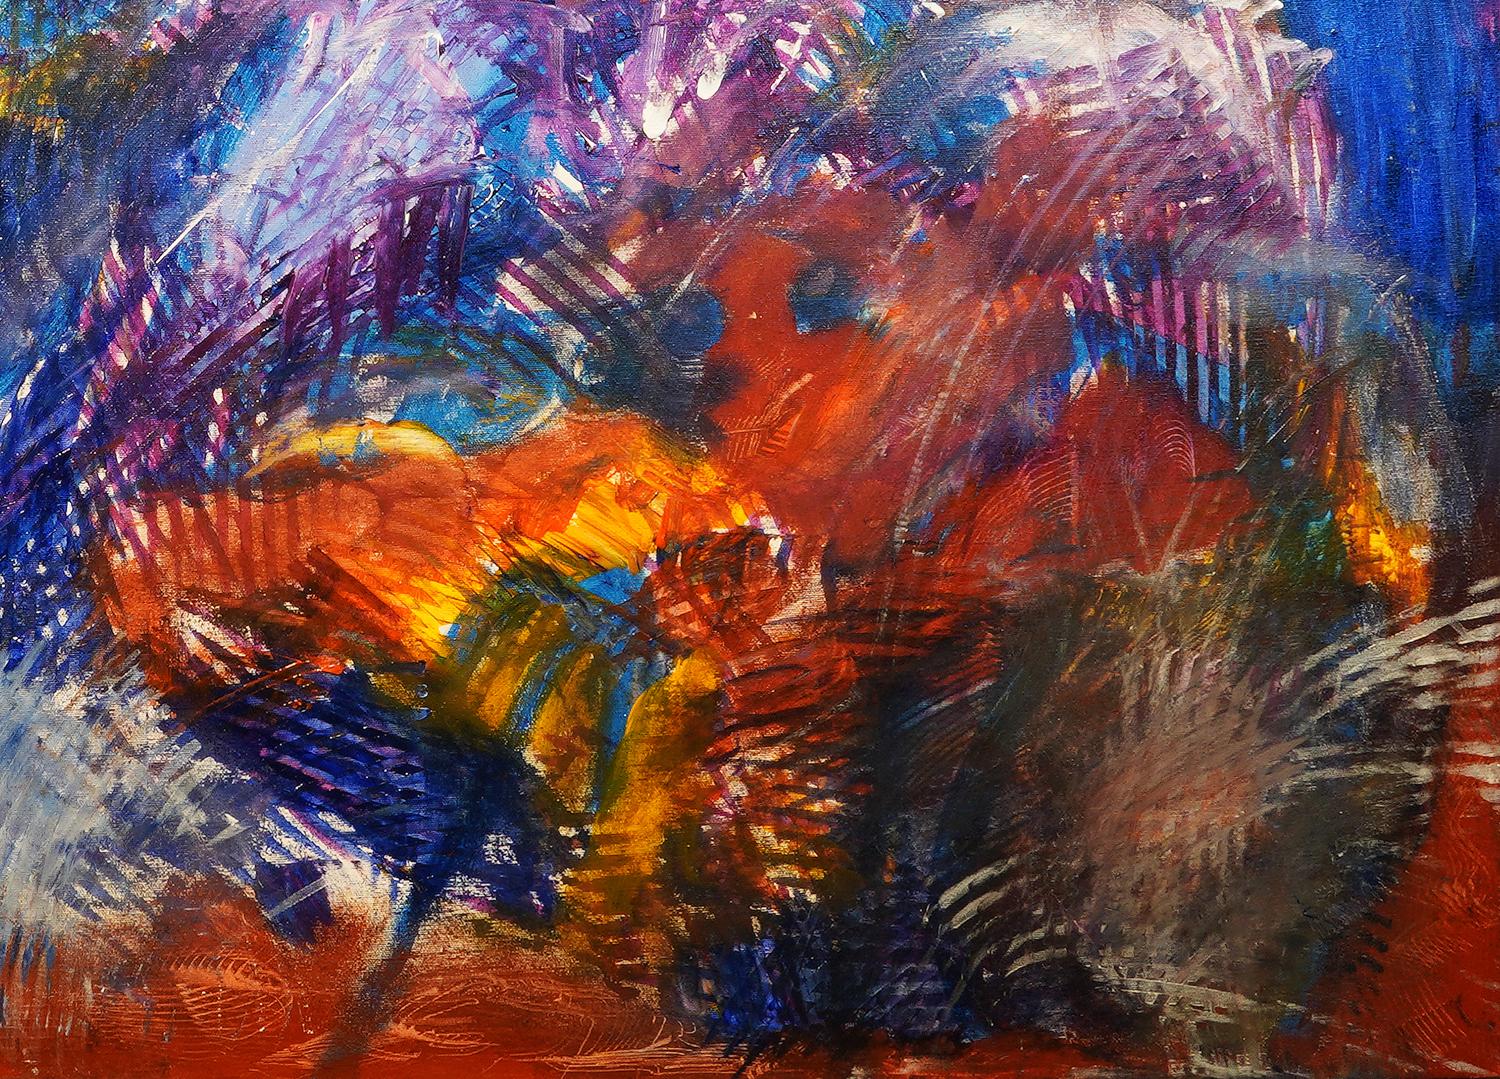 Projectiles - Abstract Expressionist Painting by Serj Tankian 